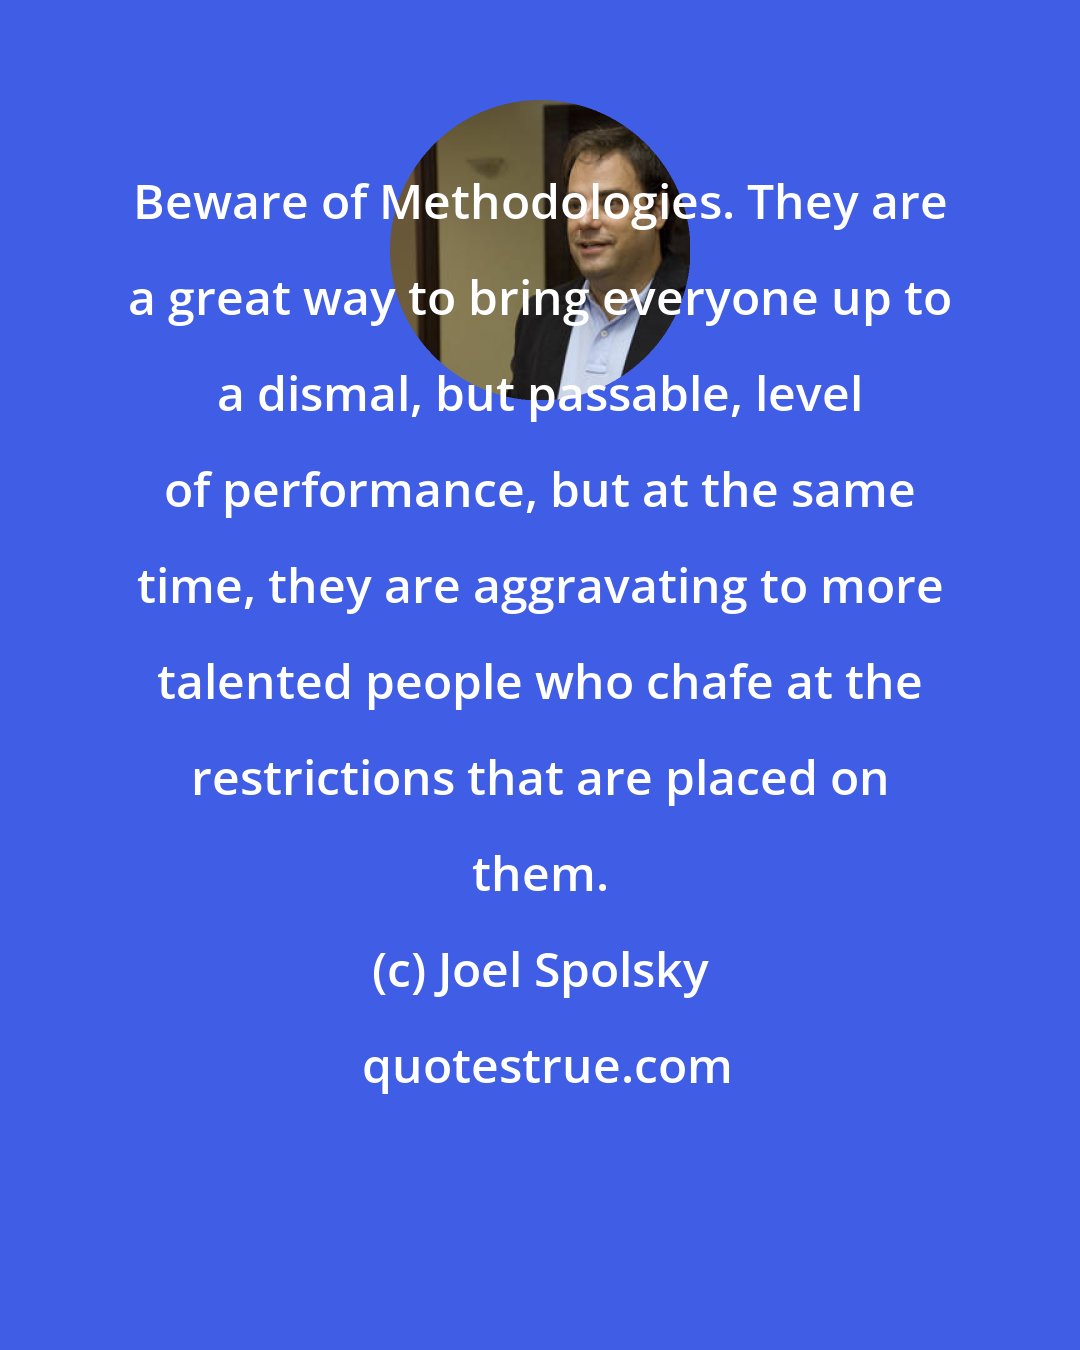 Joel Spolsky: Beware of Methodologies. They are a great way to bring everyone up to a dismal, but passable, level of performance, but at the same time, they are aggravating to more talented people who chafe at the restrictions that are placed on them.